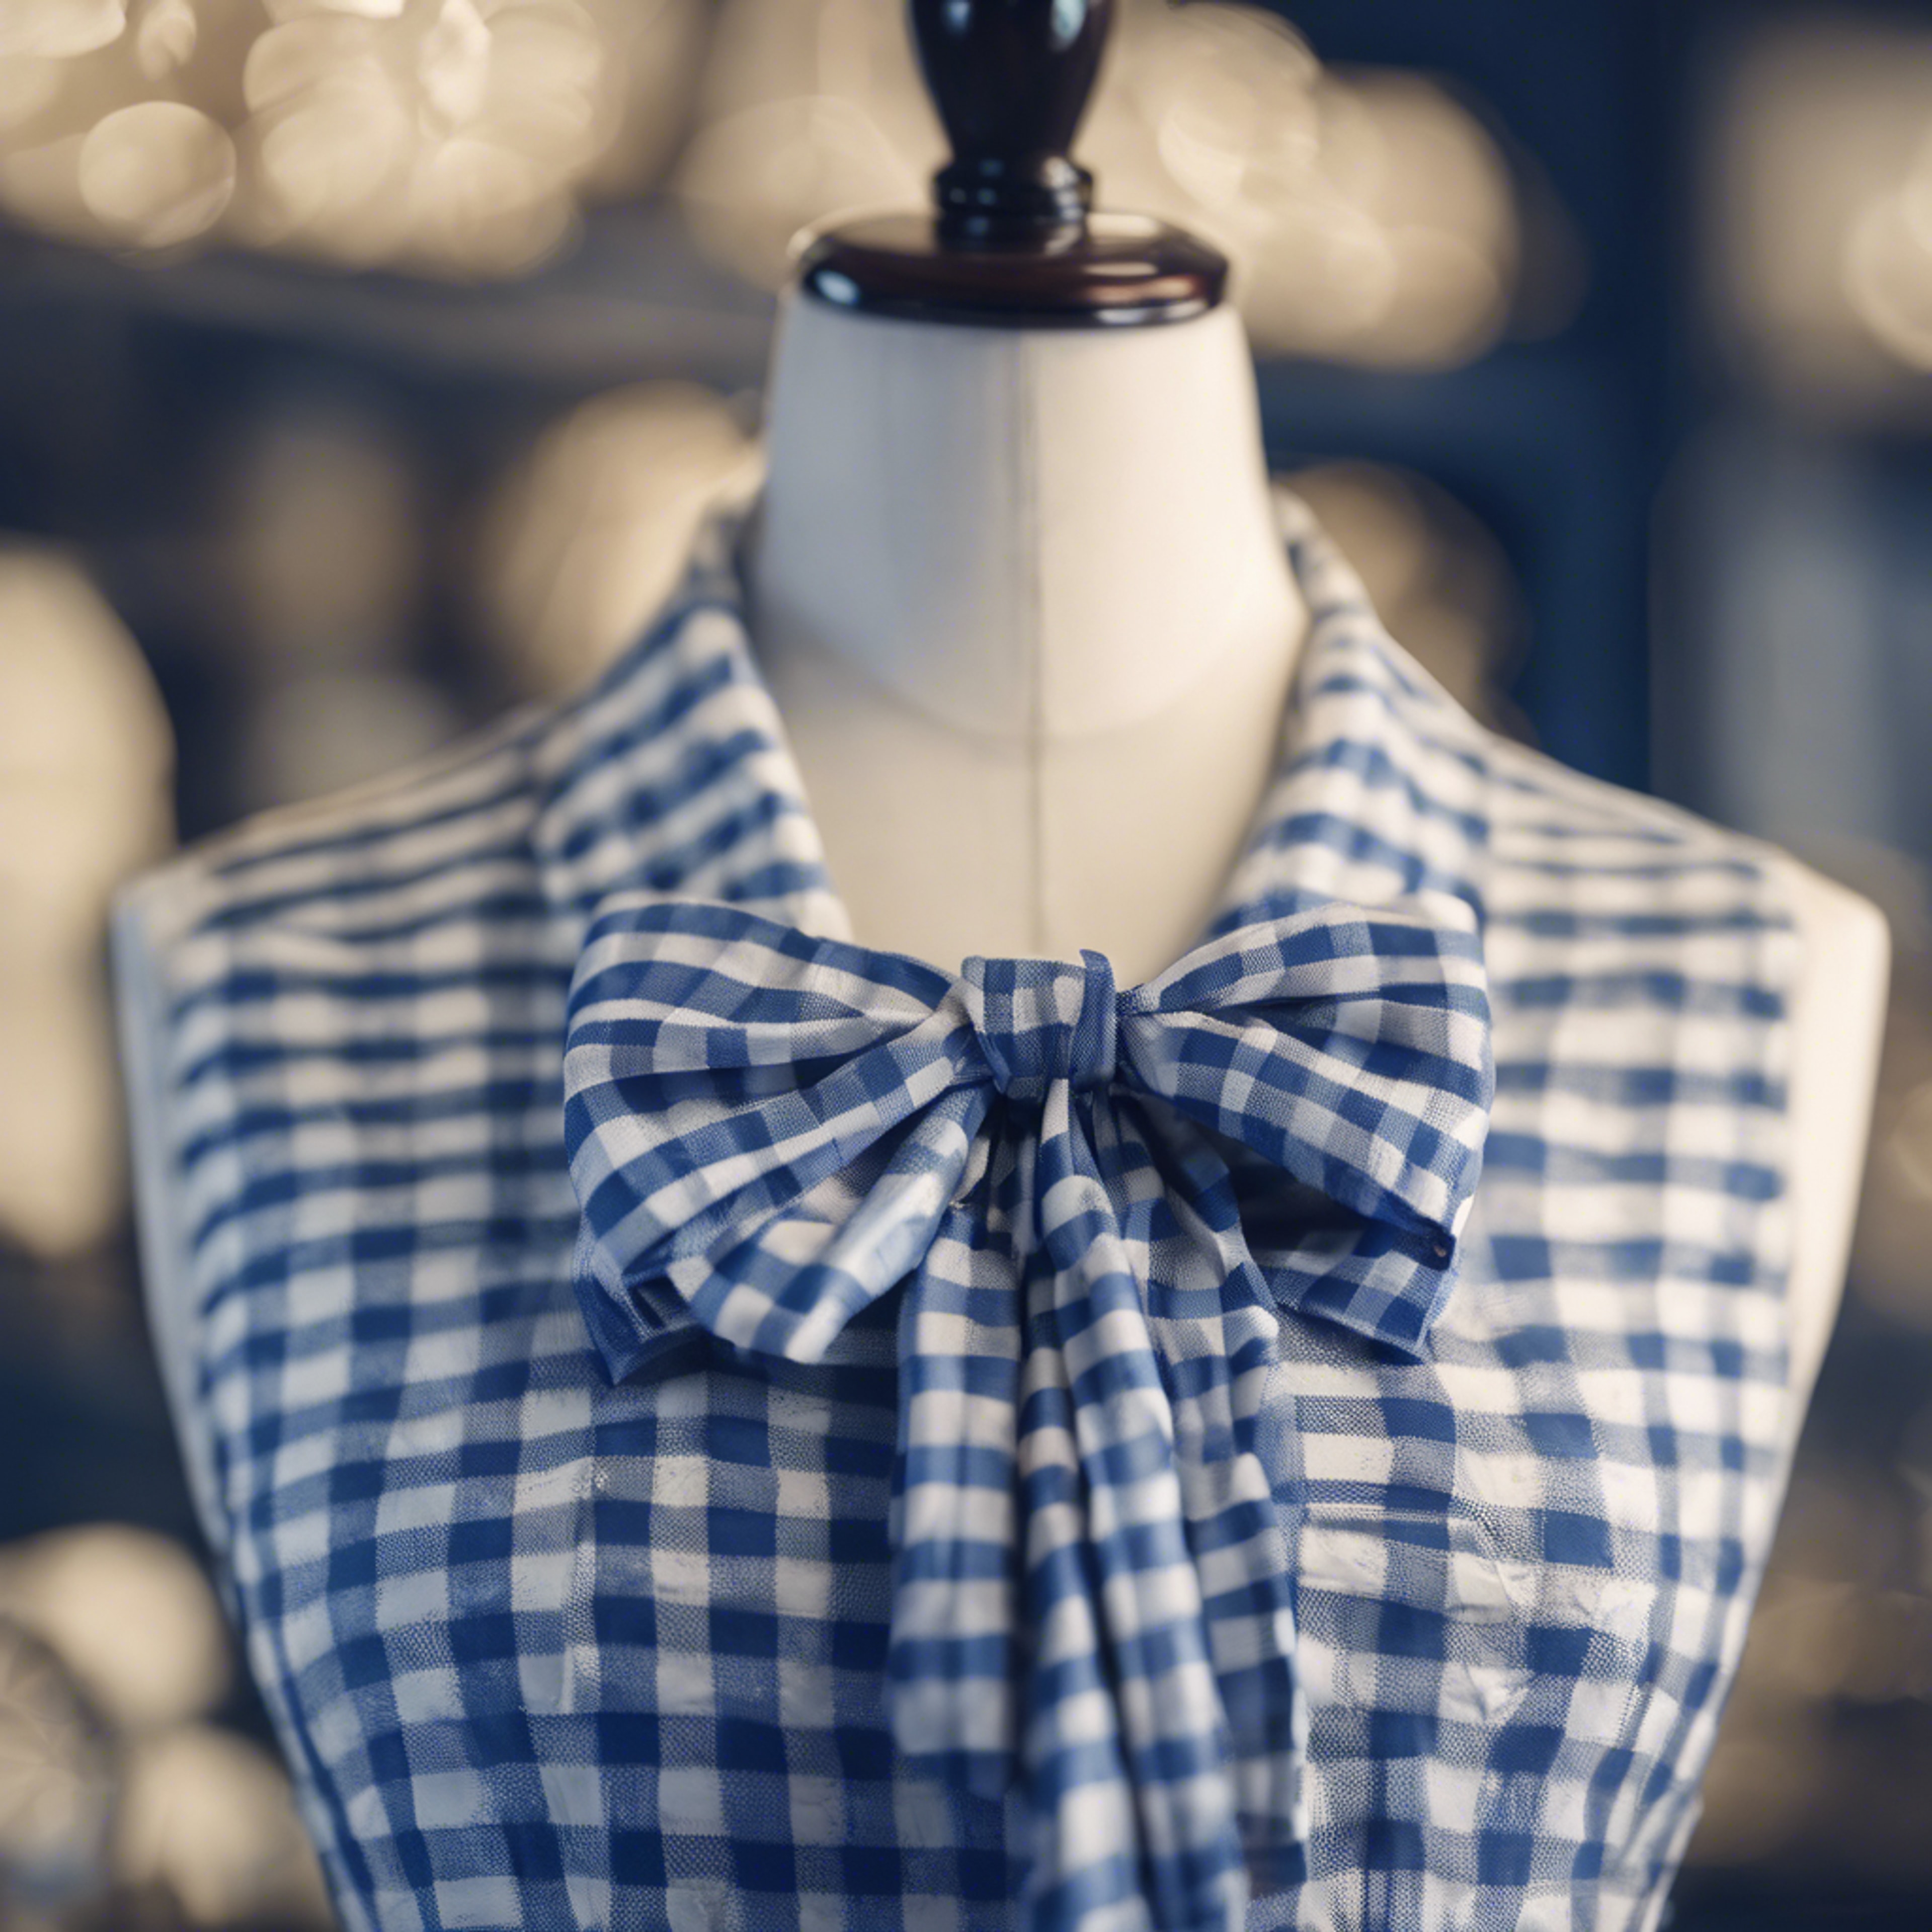 A preppy style blue and white chequered dress with a neatly tied bow on a mannequin.” ផ្ទាំង​រូបភាព[2cff79e4d79d40c780d3]